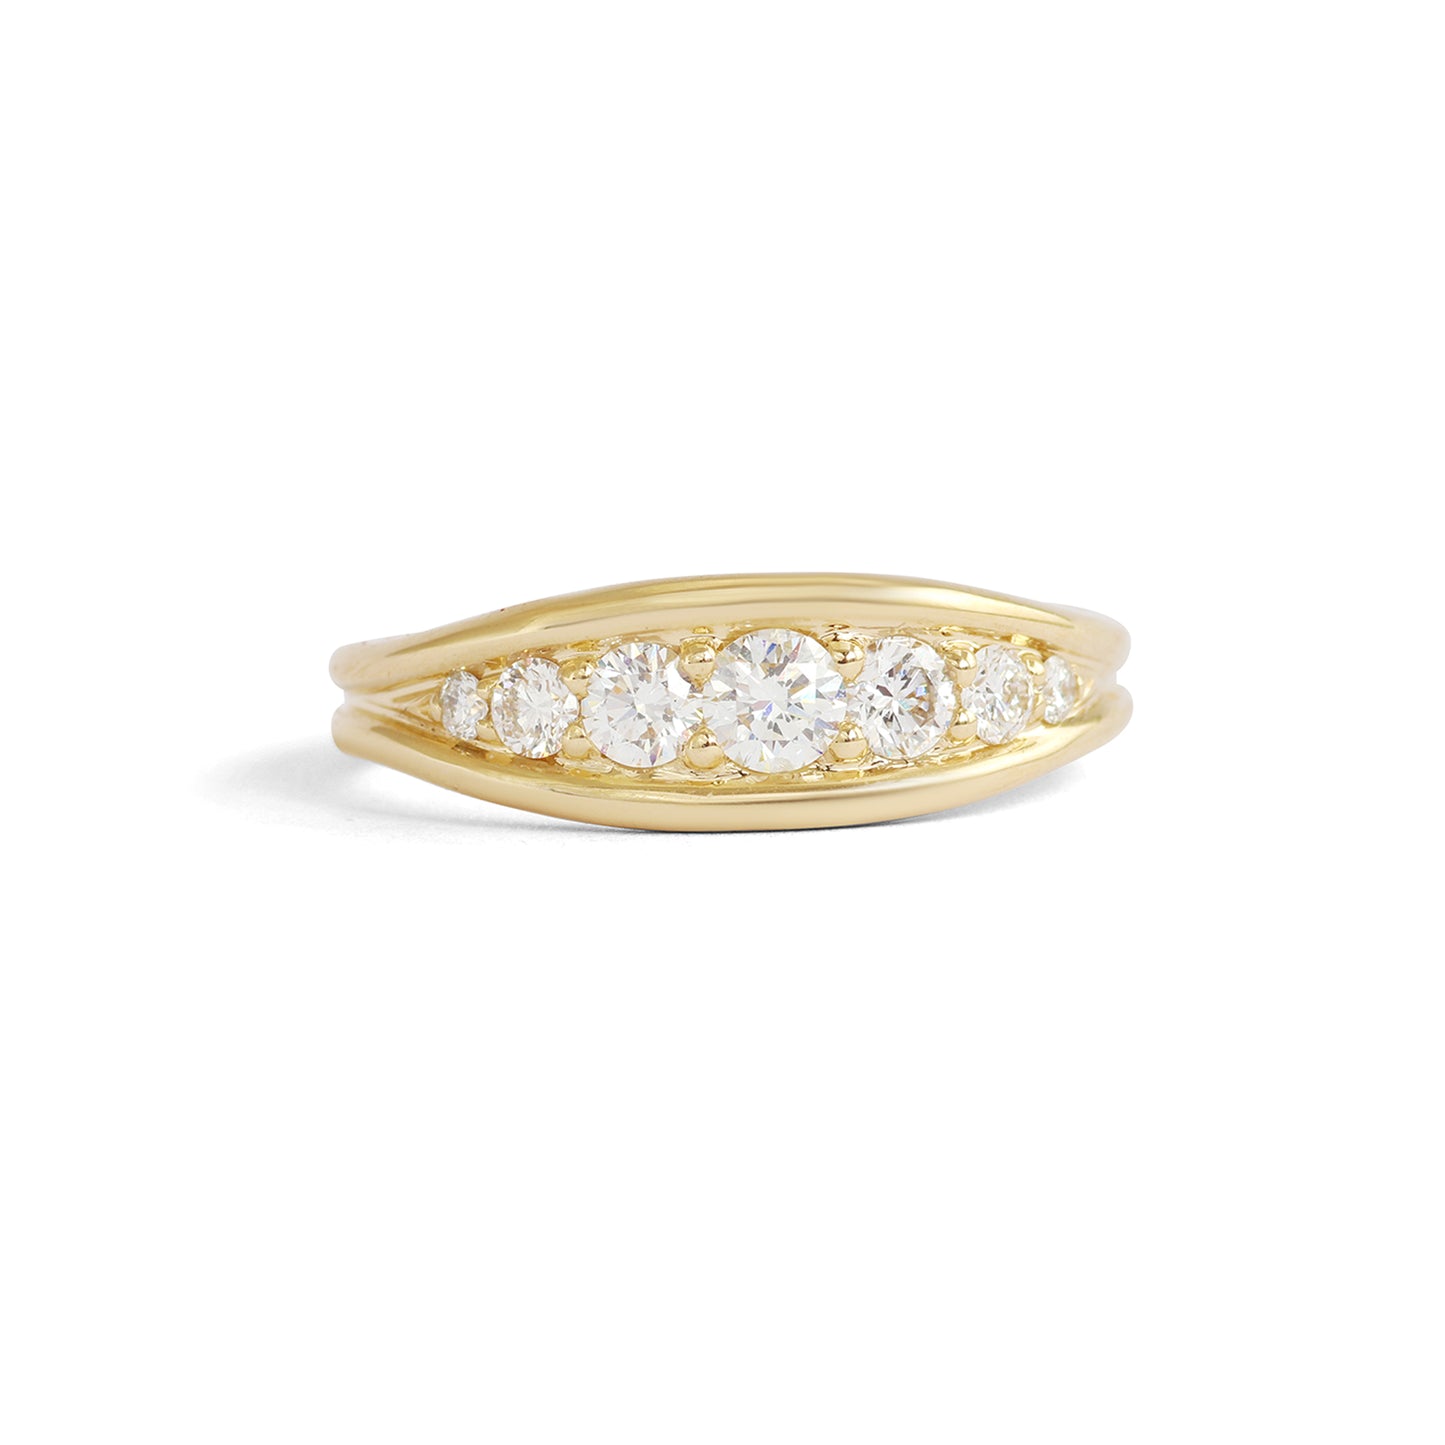 Wide Tapered Cornice Ring / Lab White Diamond - Goldpoint Studio - Greenpoint, Brooklyn - Fine Jewelry